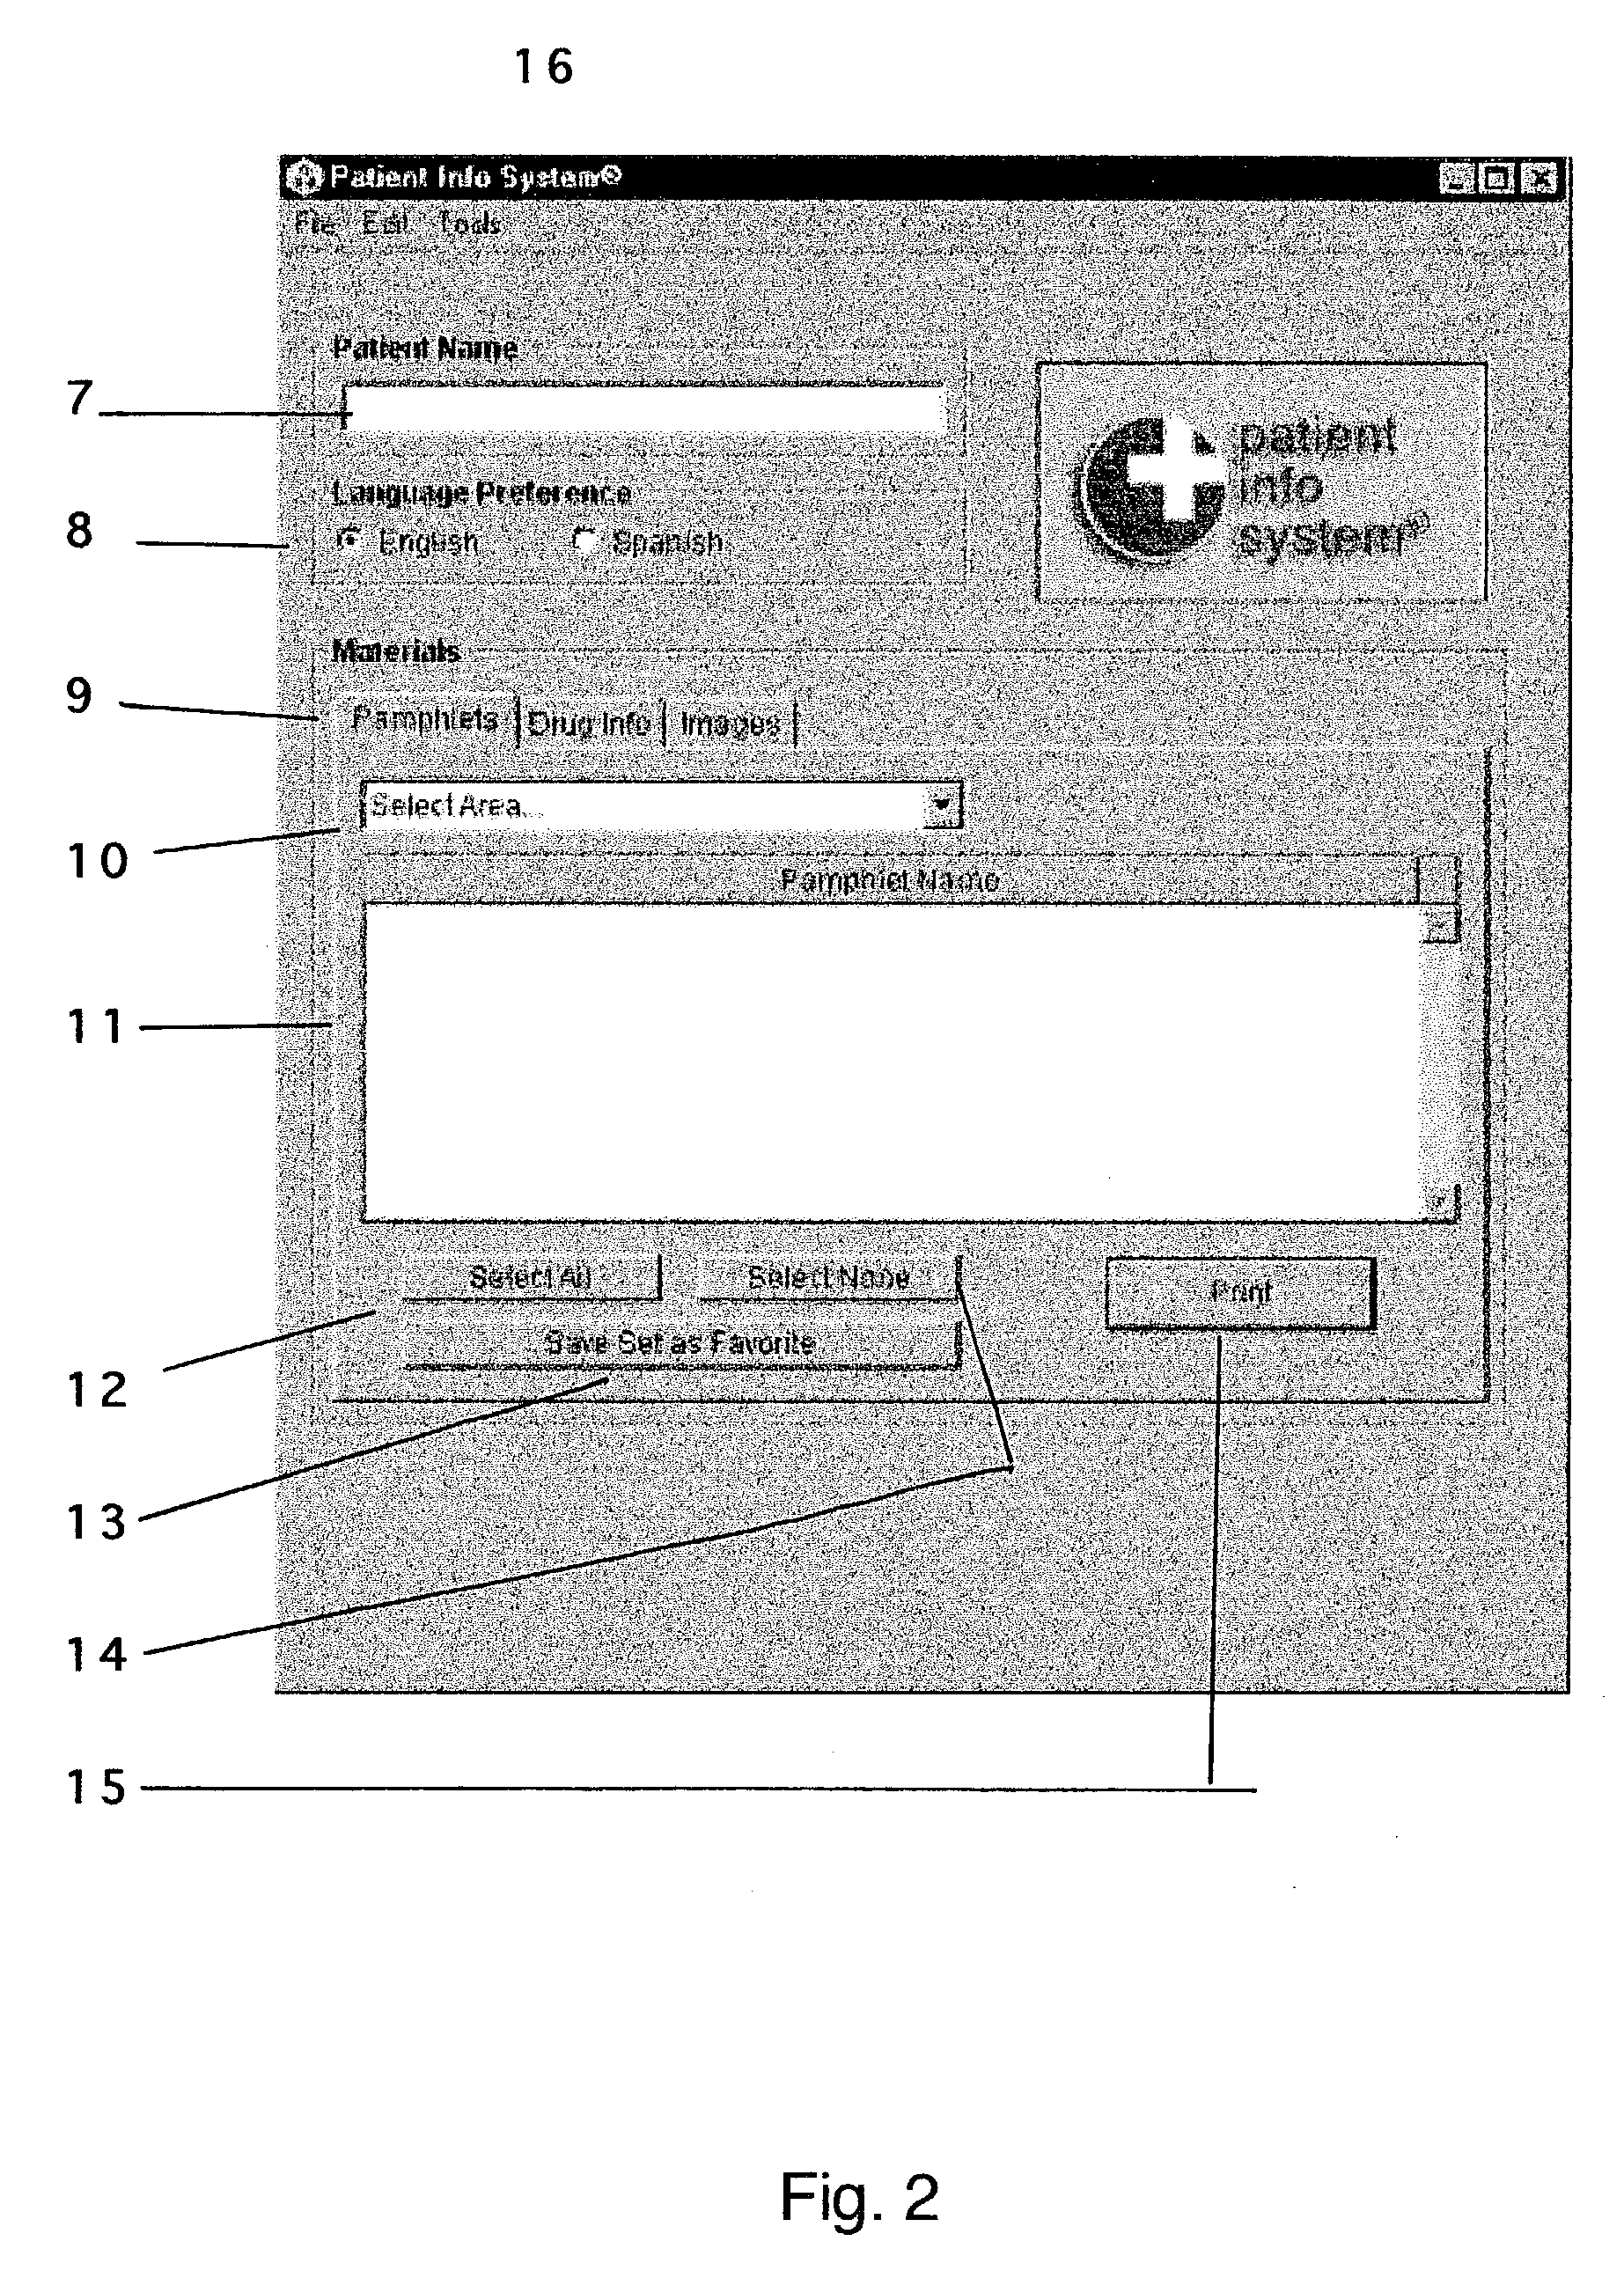 Method for generating customized patient education documents